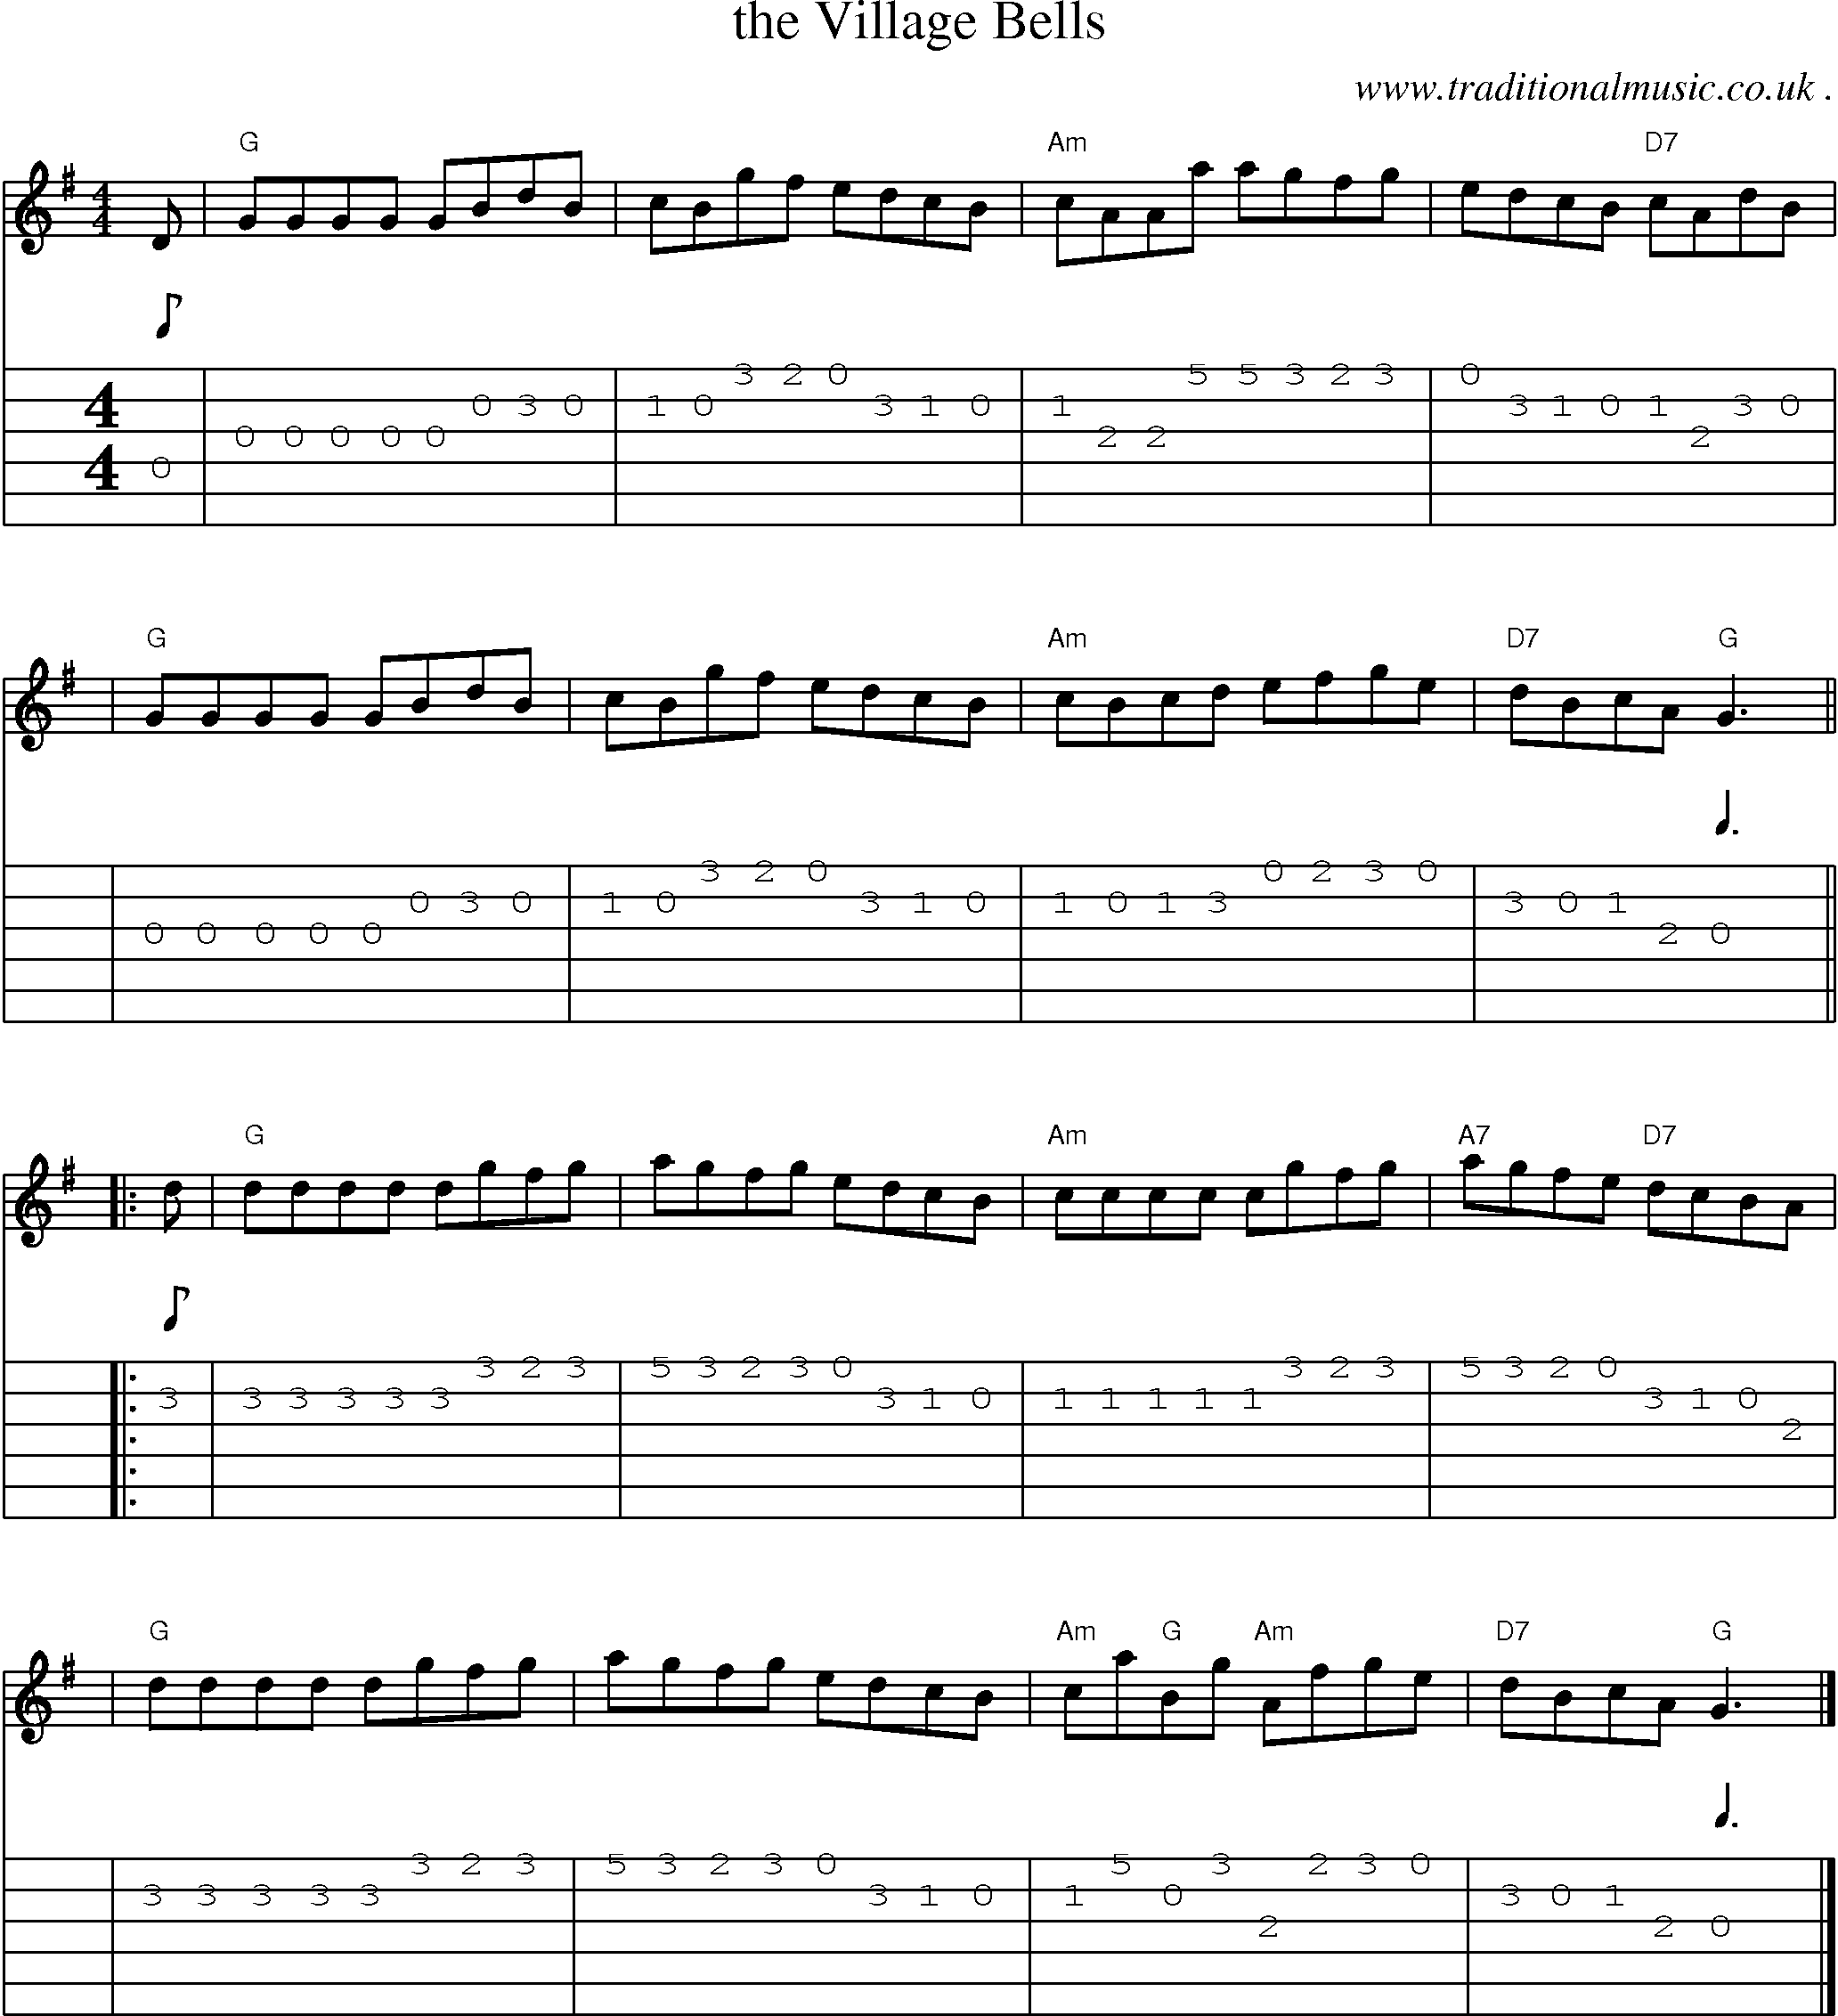 Sheet-music  score, Chords and Guitar Tabs for The Village Bells